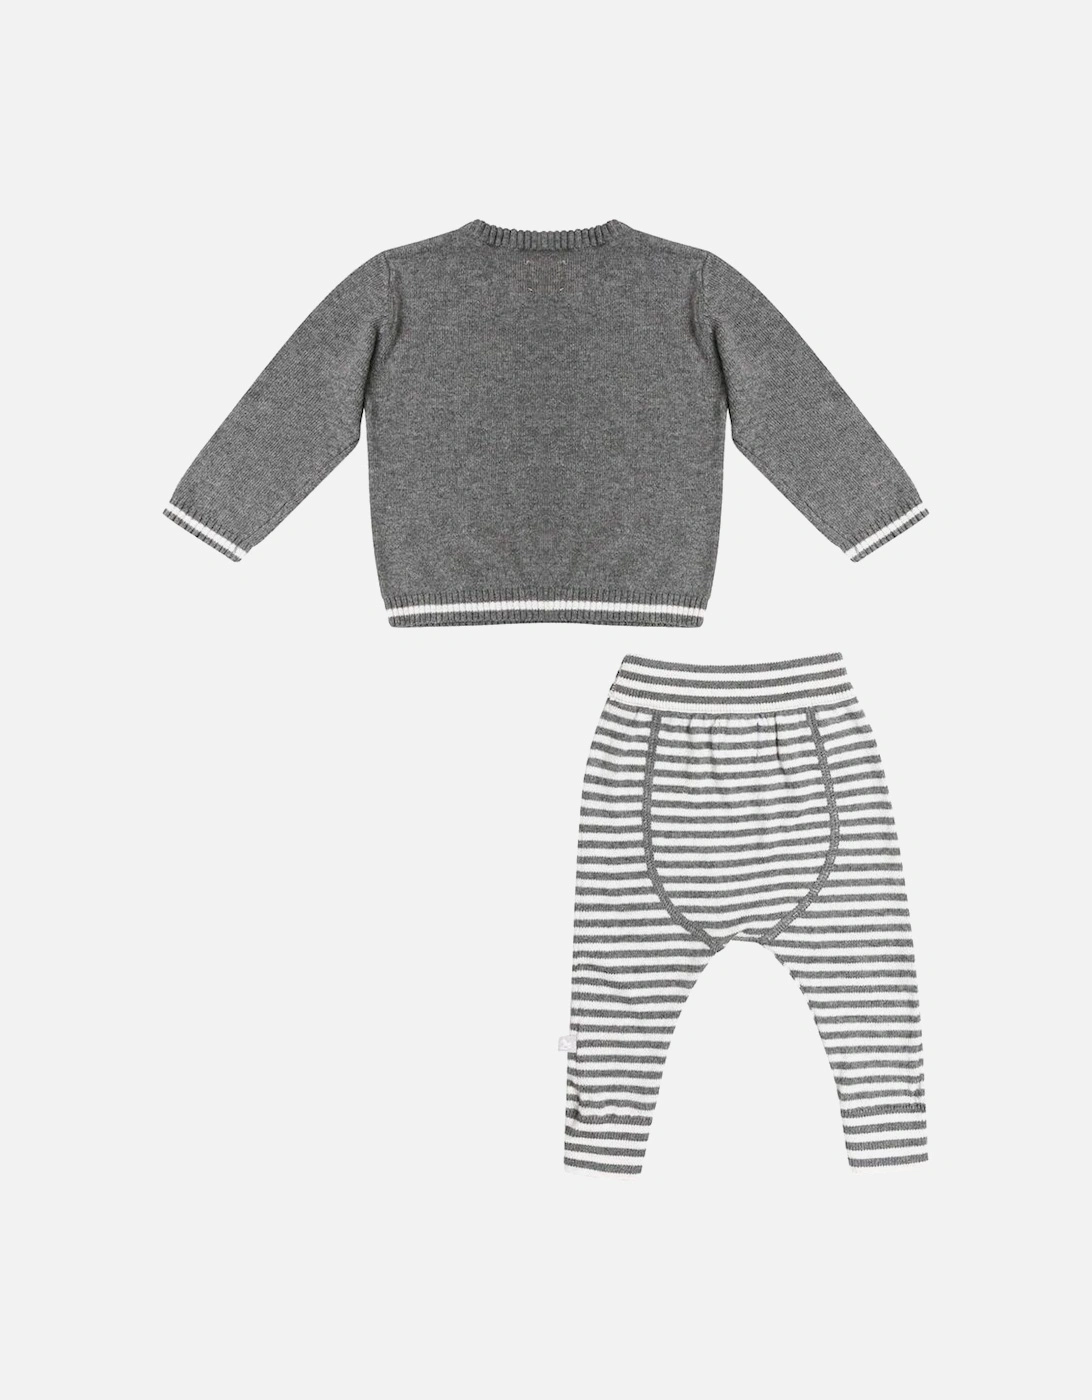 Unisex Charcoal Grey Knitted Jumper and Leggings